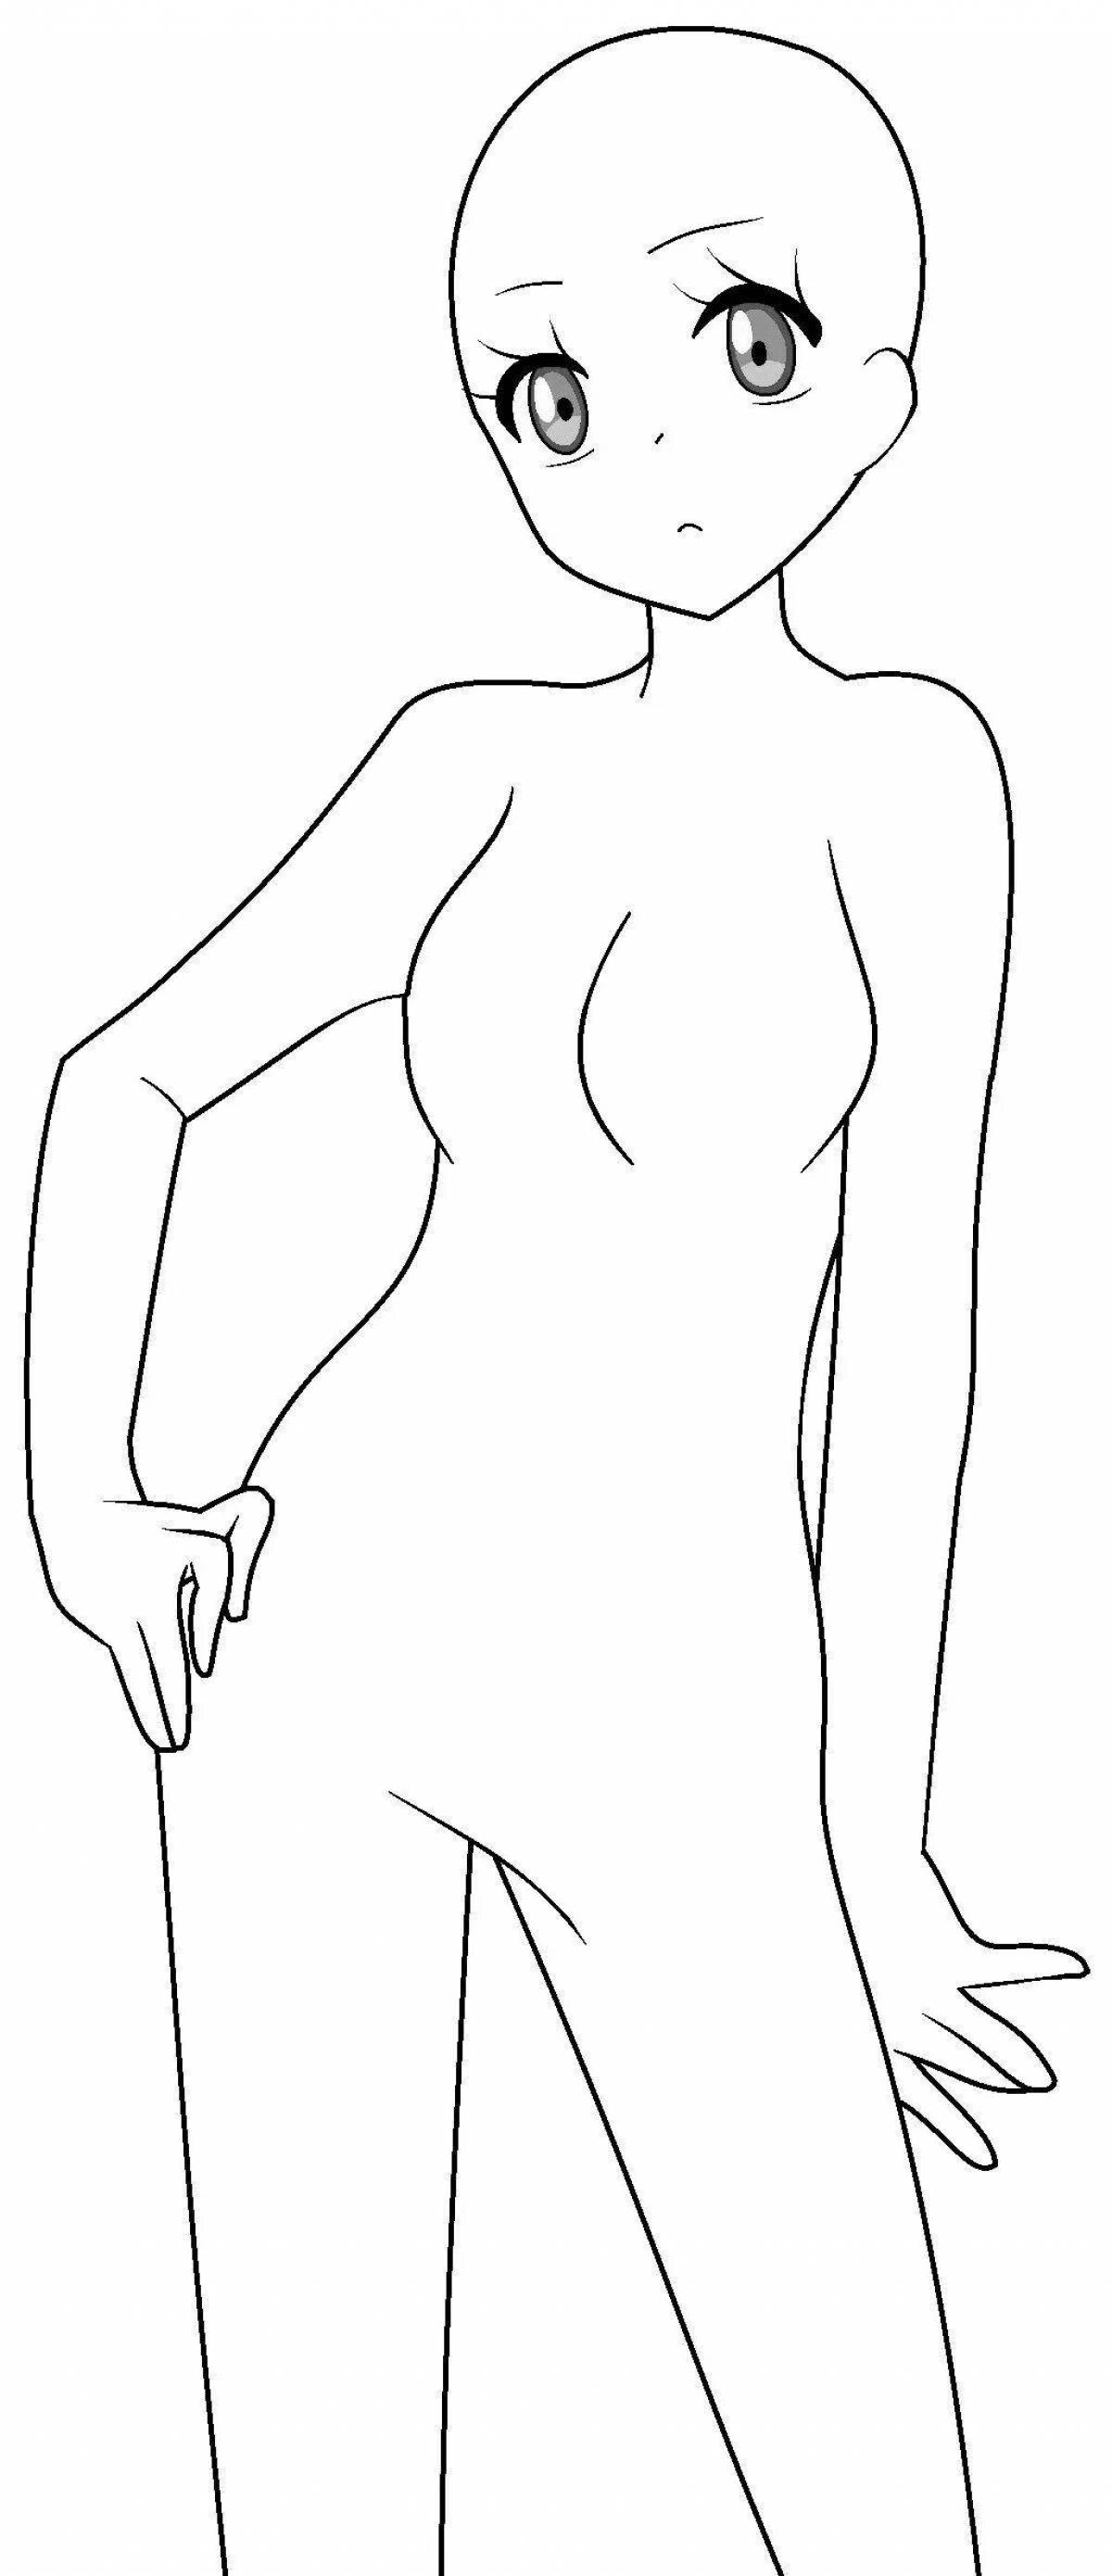 Colorful anime body coloring page